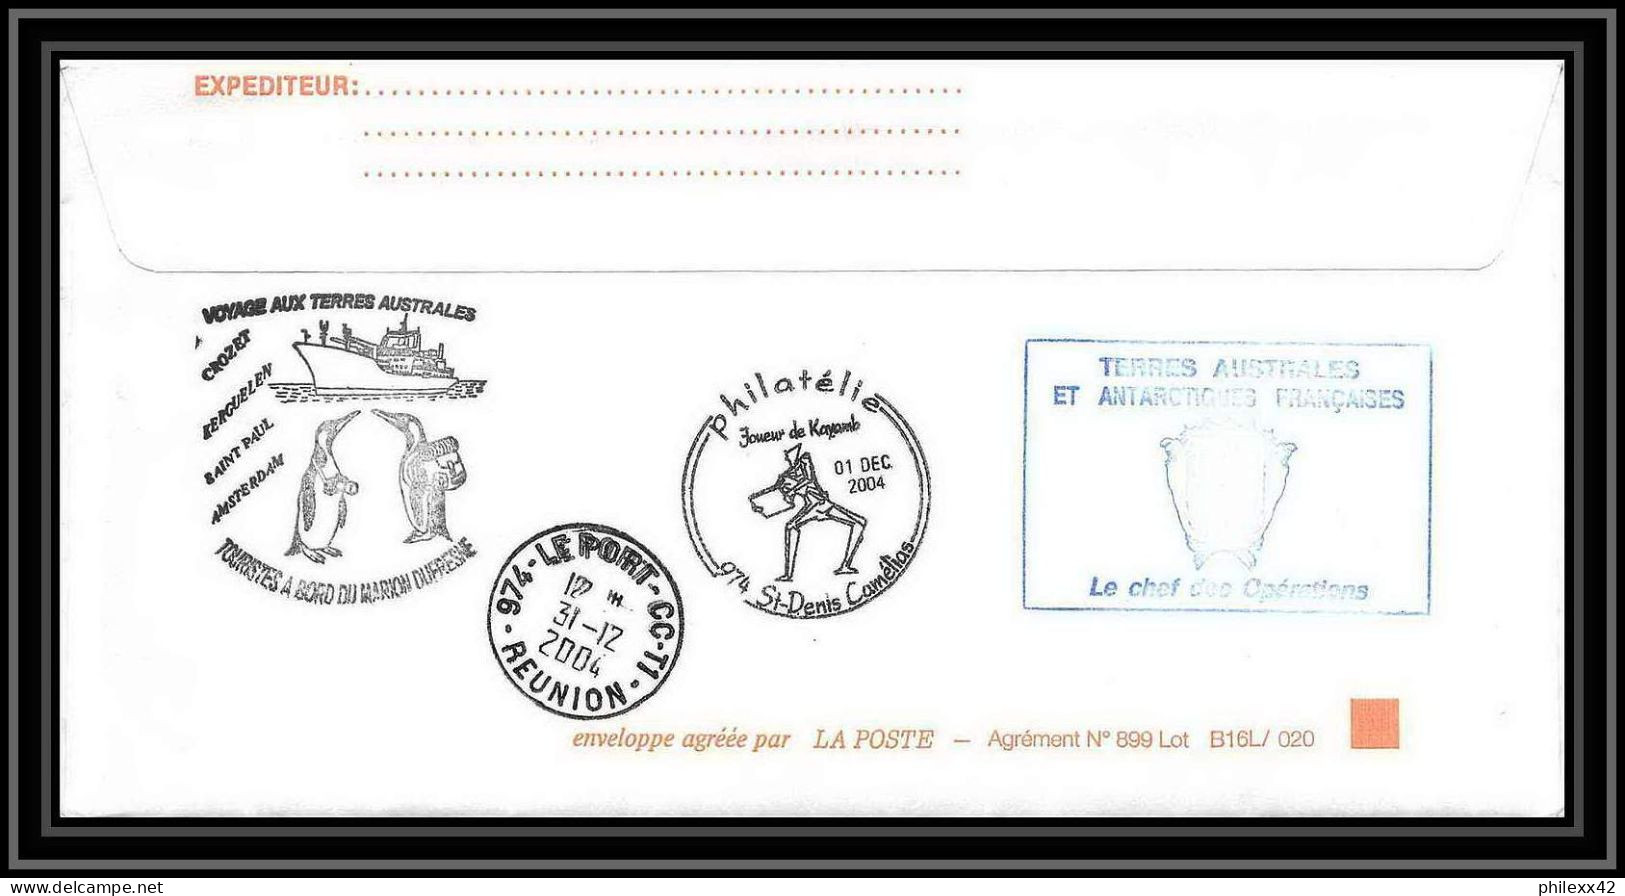 2483 ANTARCTIC Terres Australes TAAF Lettre Cover Dufresne 2 Signé Signed OP 2004/4 N°392 21/12/2004 Helilagon - Hélicoptères